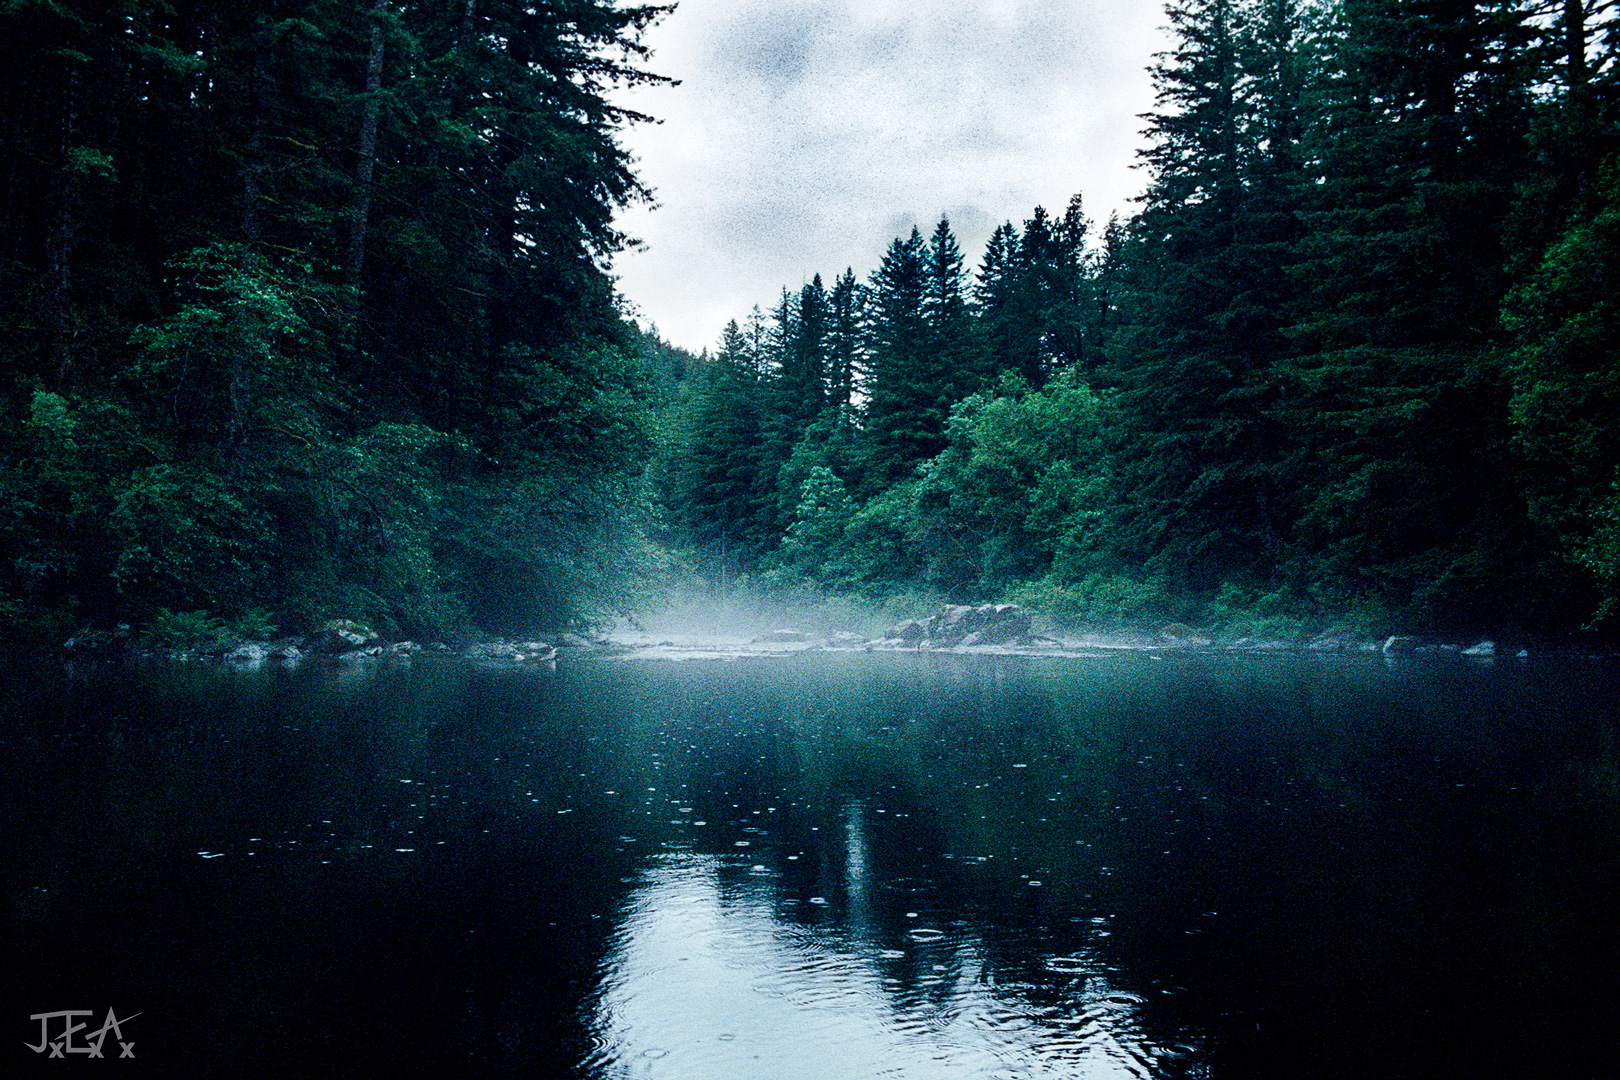 A foggy river bend surrounded by dense forest.